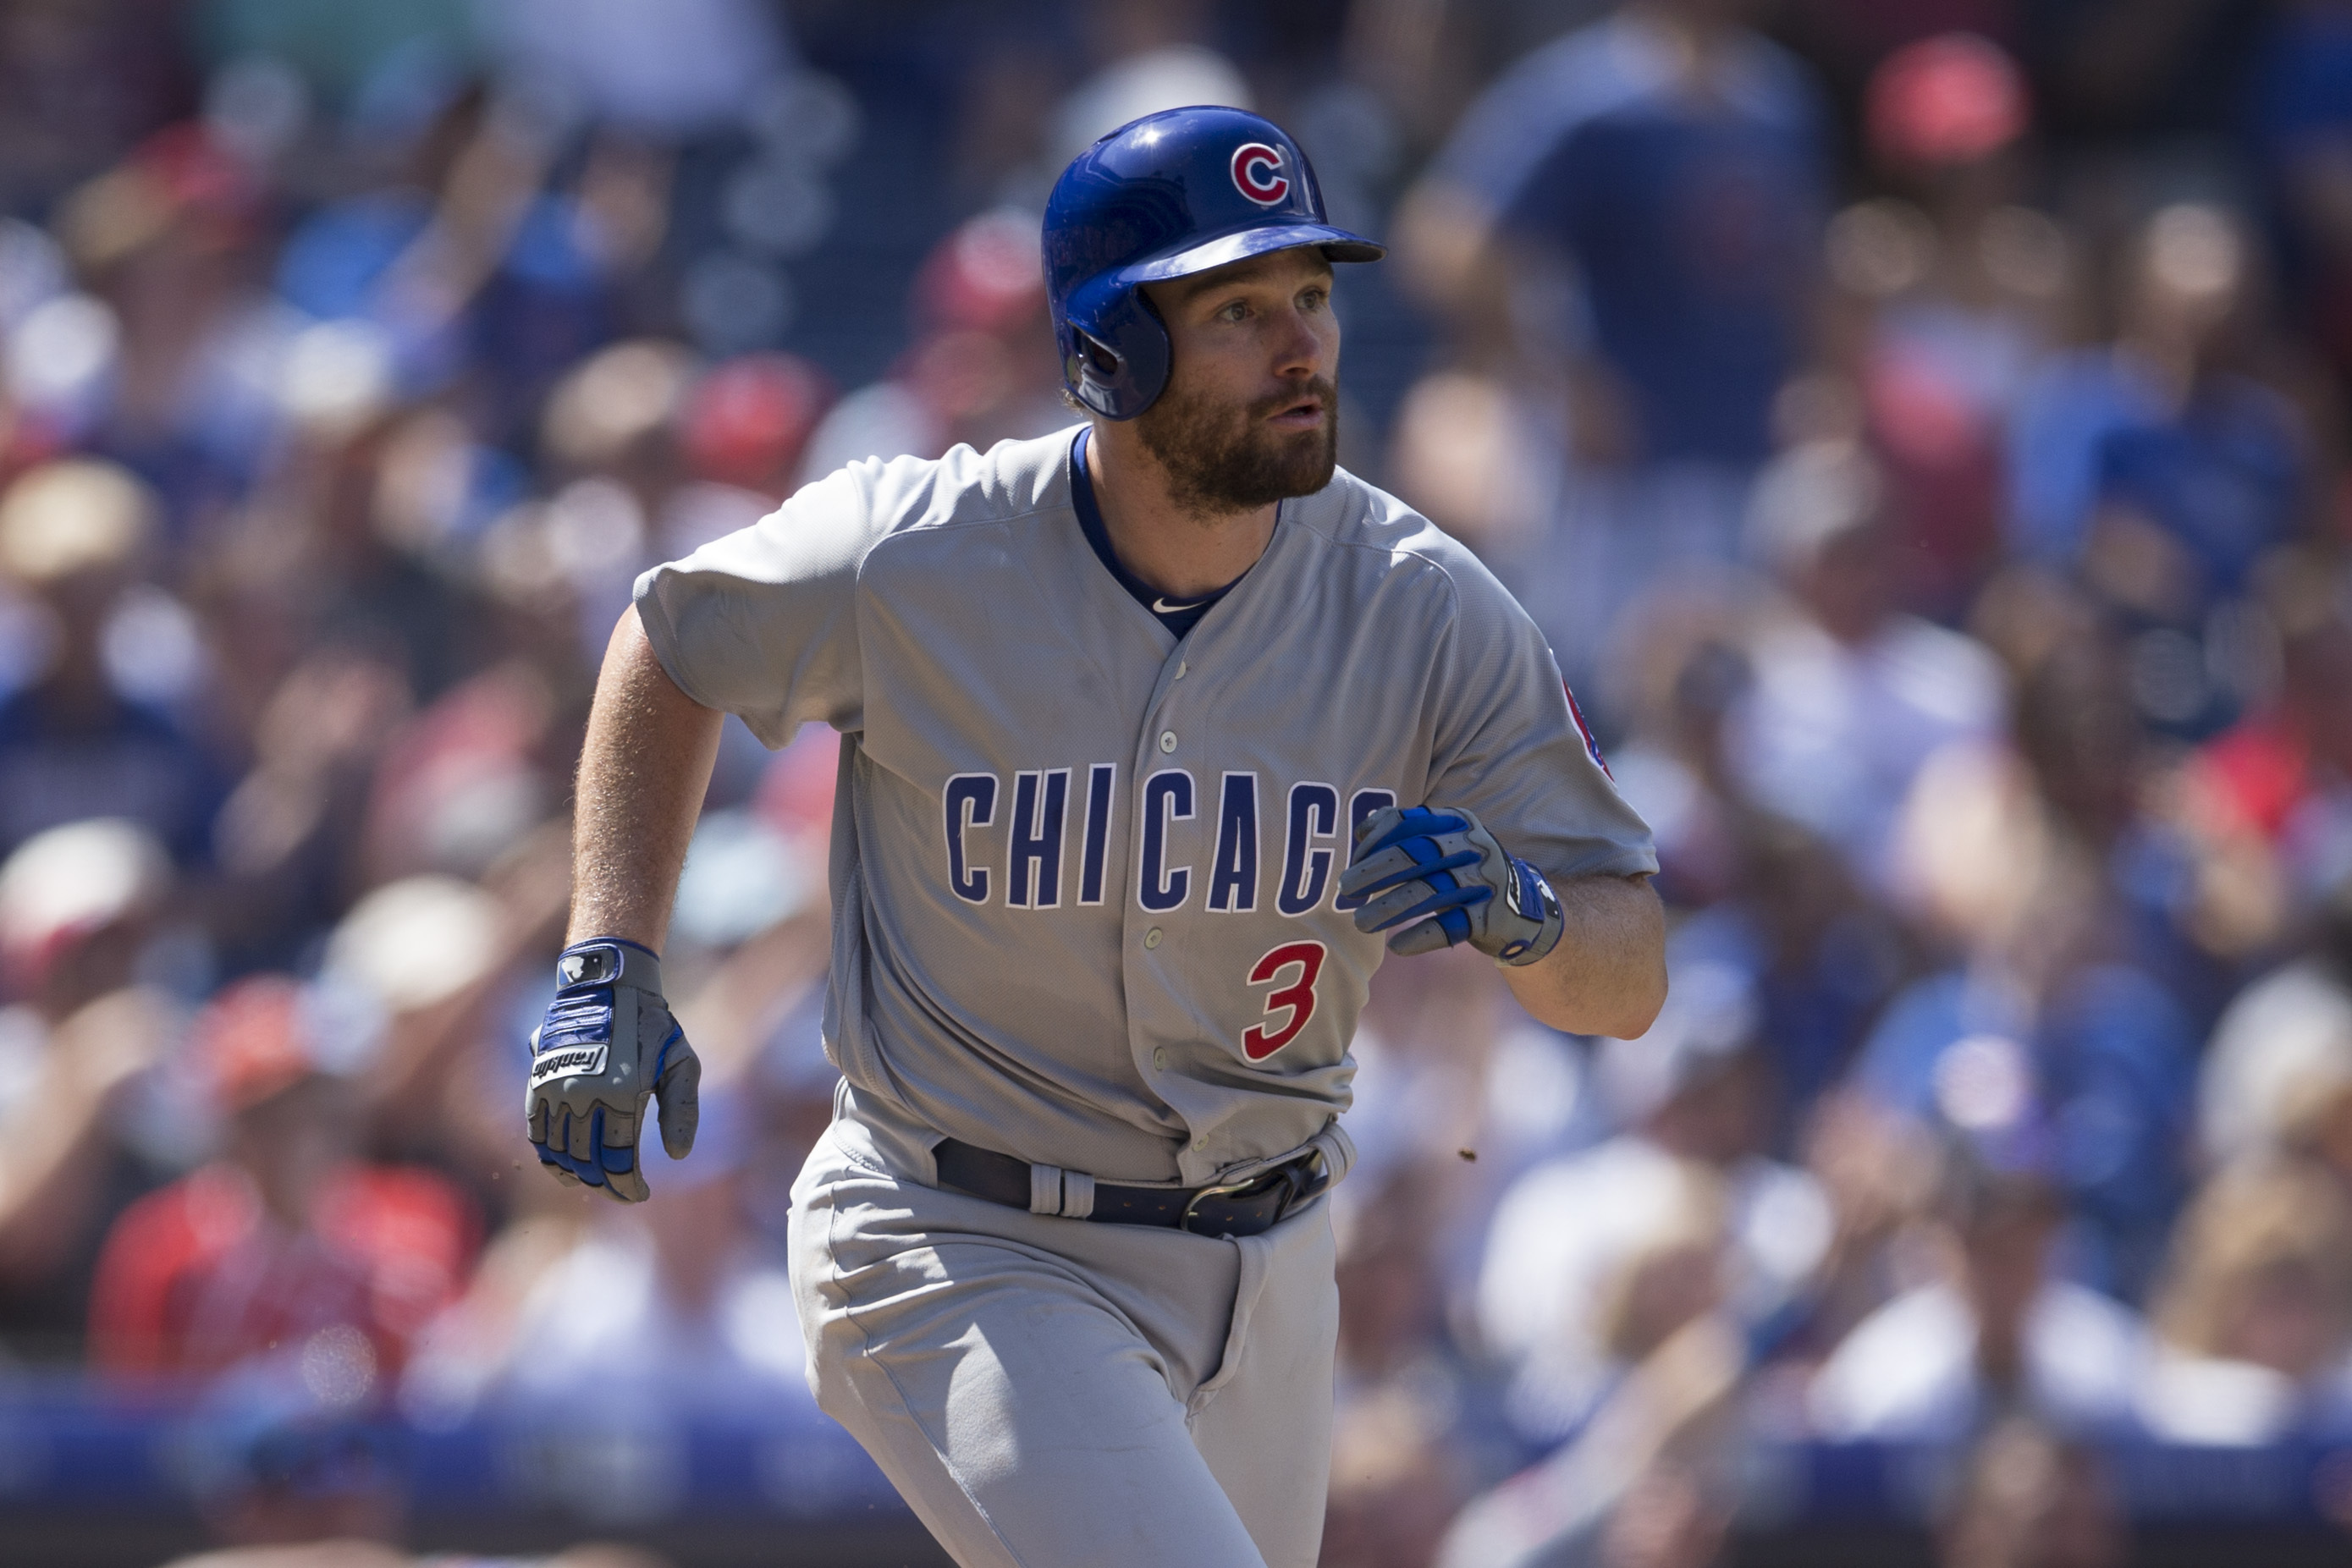 Report: The Rockies have discussed signing Daniel Murphy as a